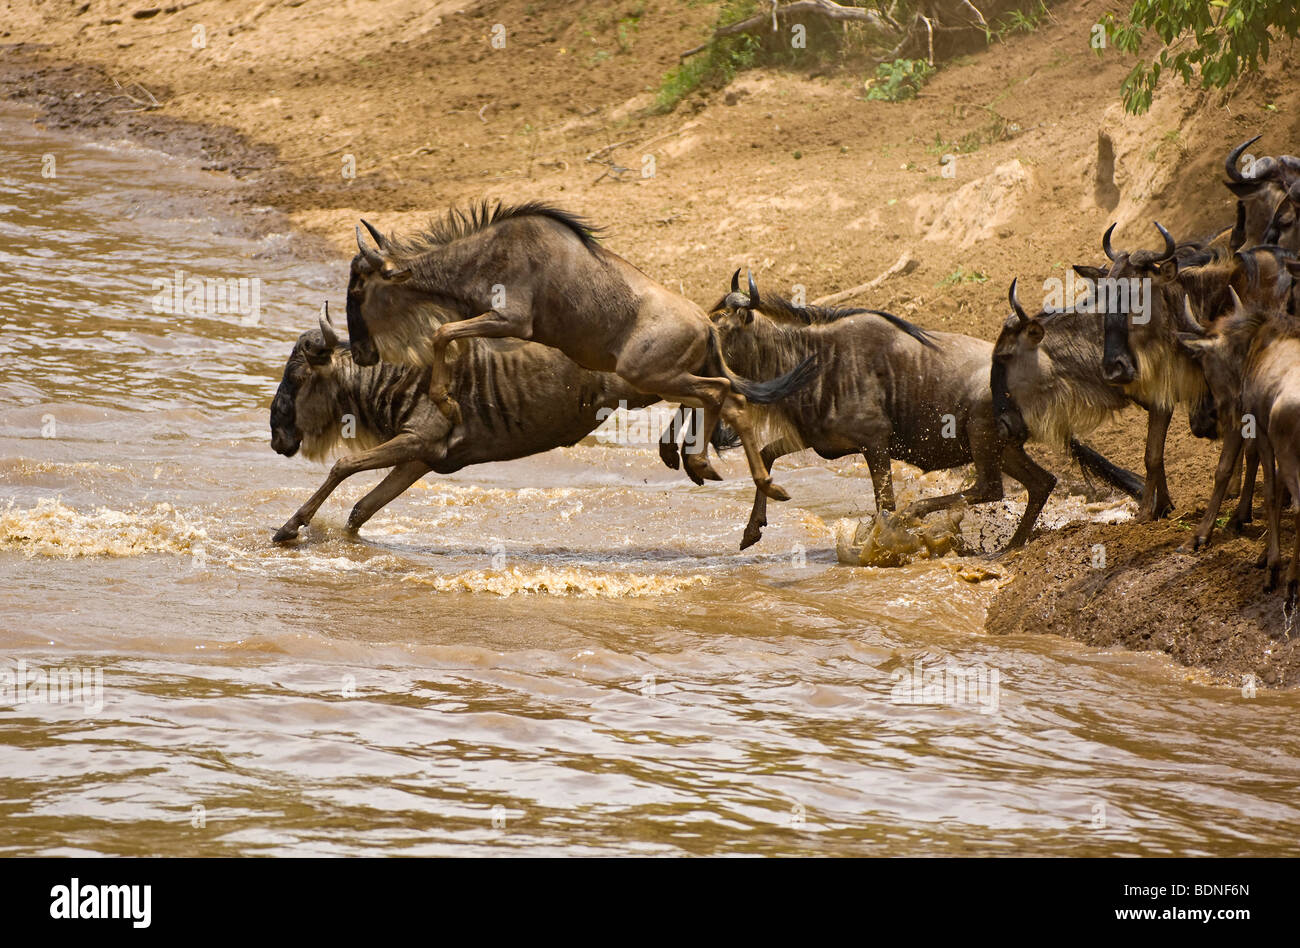 Wildebeest (Connochaetes) leap and plunge into Mara River during annual migration, Masai Mara Park Reserve, Kenya Stock Photo